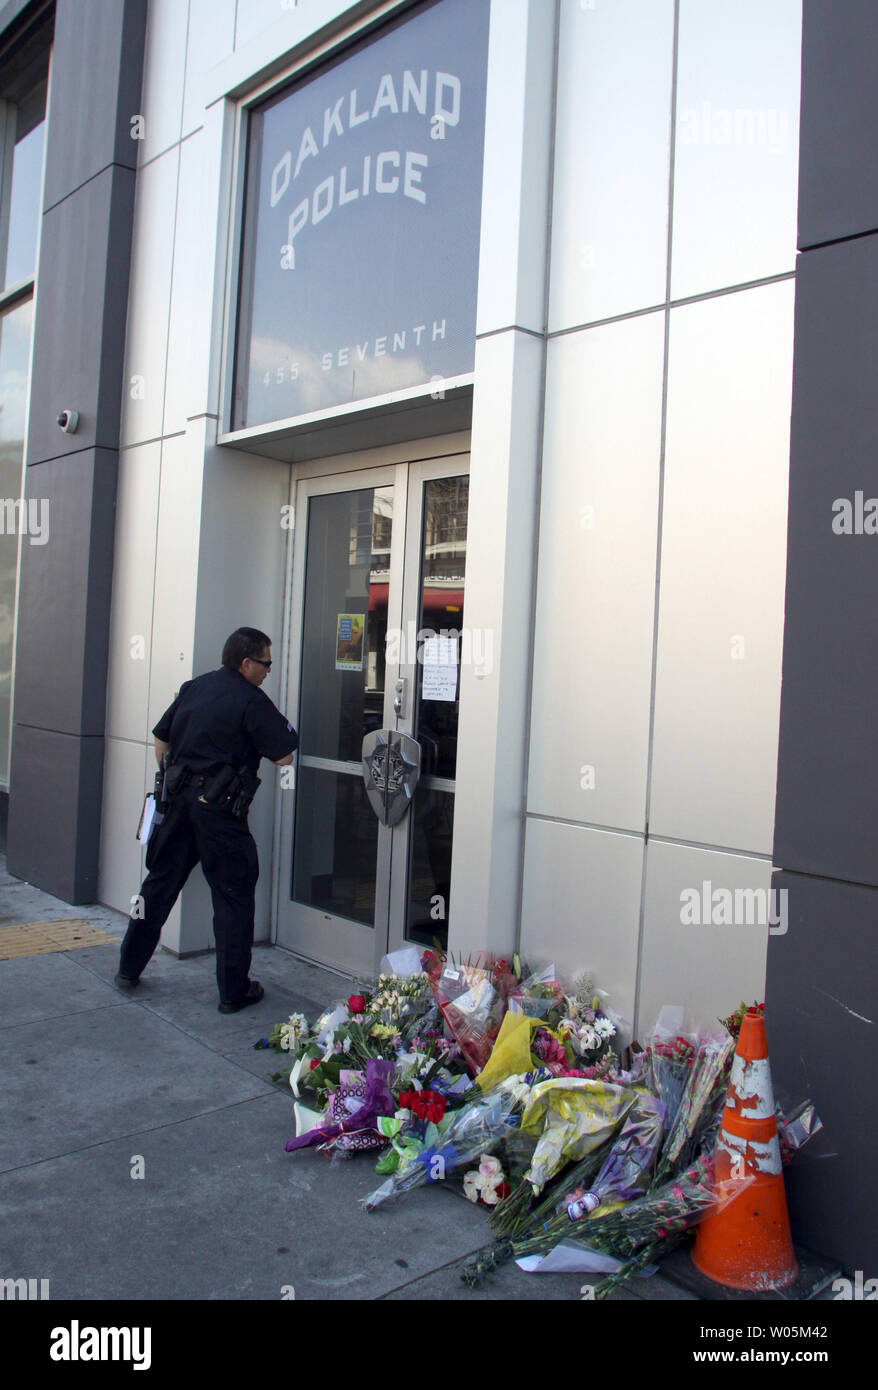 An Oakland police officer walks by a growing number of flowers on March 22, 2009, in front of the Oakland Police department in memory of the four Oakland Police officers shot to death on March 21 in Oakland, California. A parolee shot to death three police sergeants within two hours during a traffic stops. The fourth officer died from gun shot wounds Sunday morning at the Highland hospital in Oakland.   (UPI Photo/Bob Larson) Stock Photo